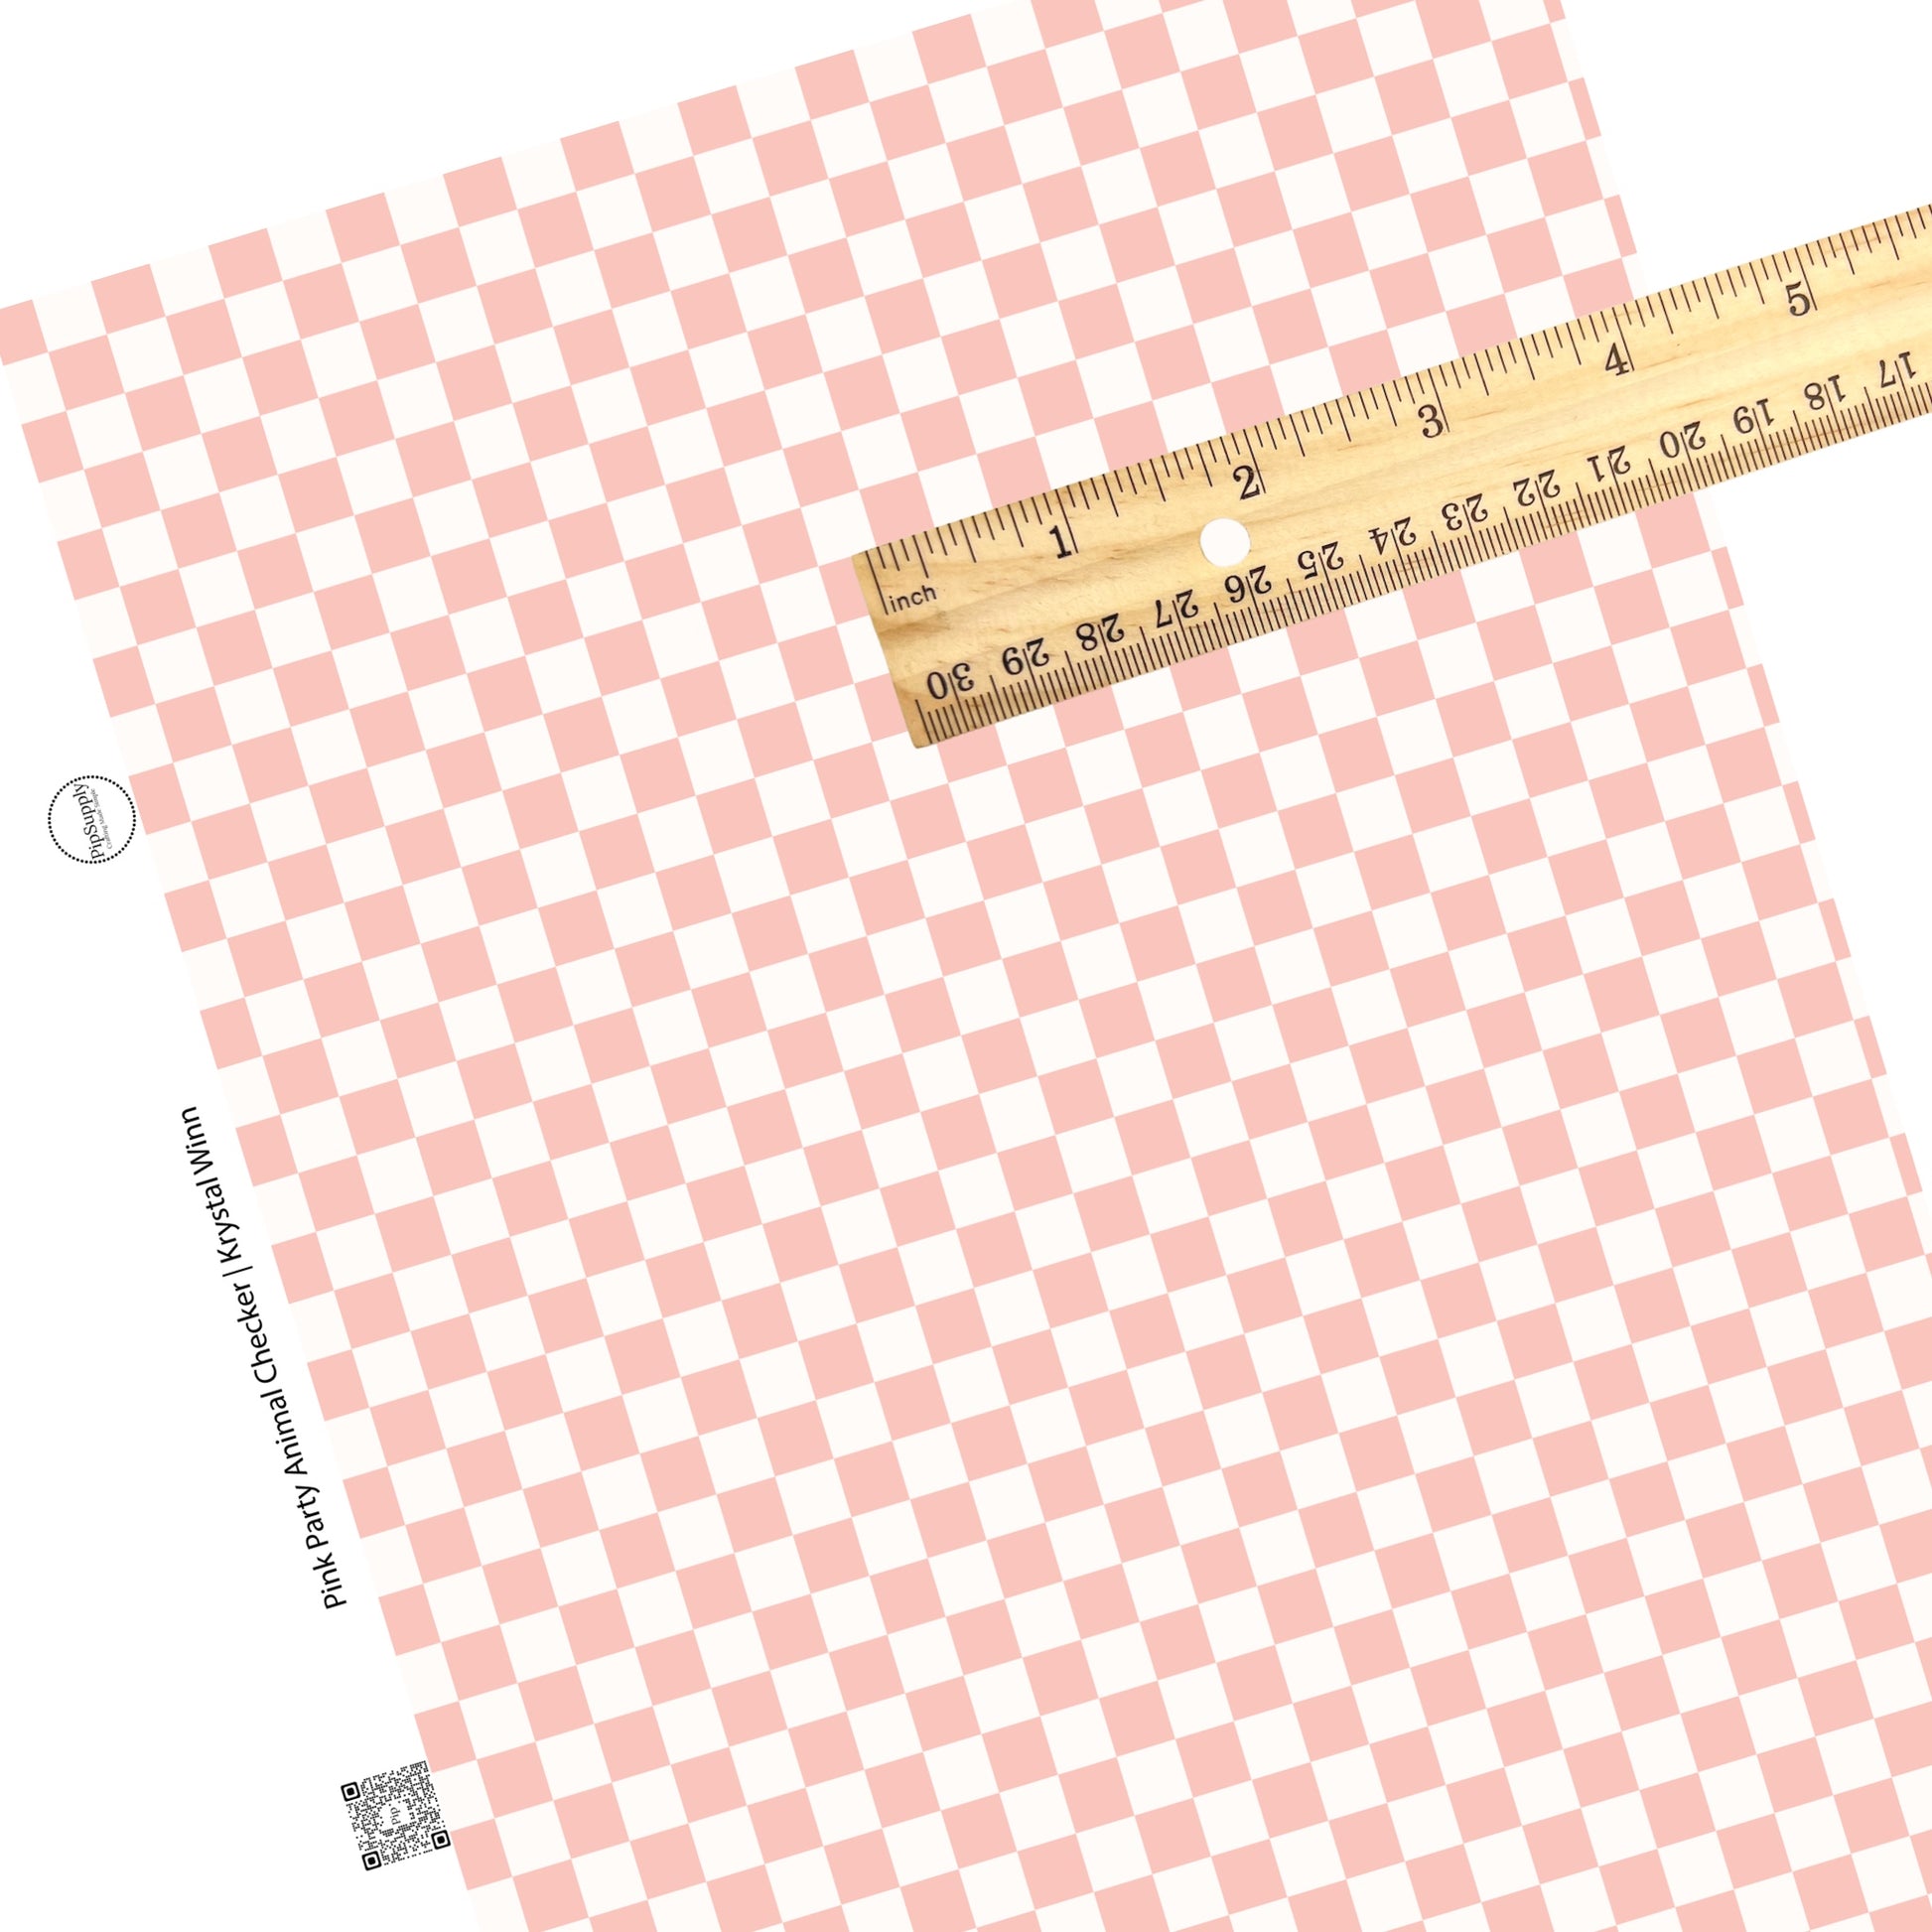 These checkered themed faux leather sheets contain the following design elements: cream and light pink checkered pattern. Our CPSIA compliant faux leather sheets or rolls can be used for all types of crafting projects.